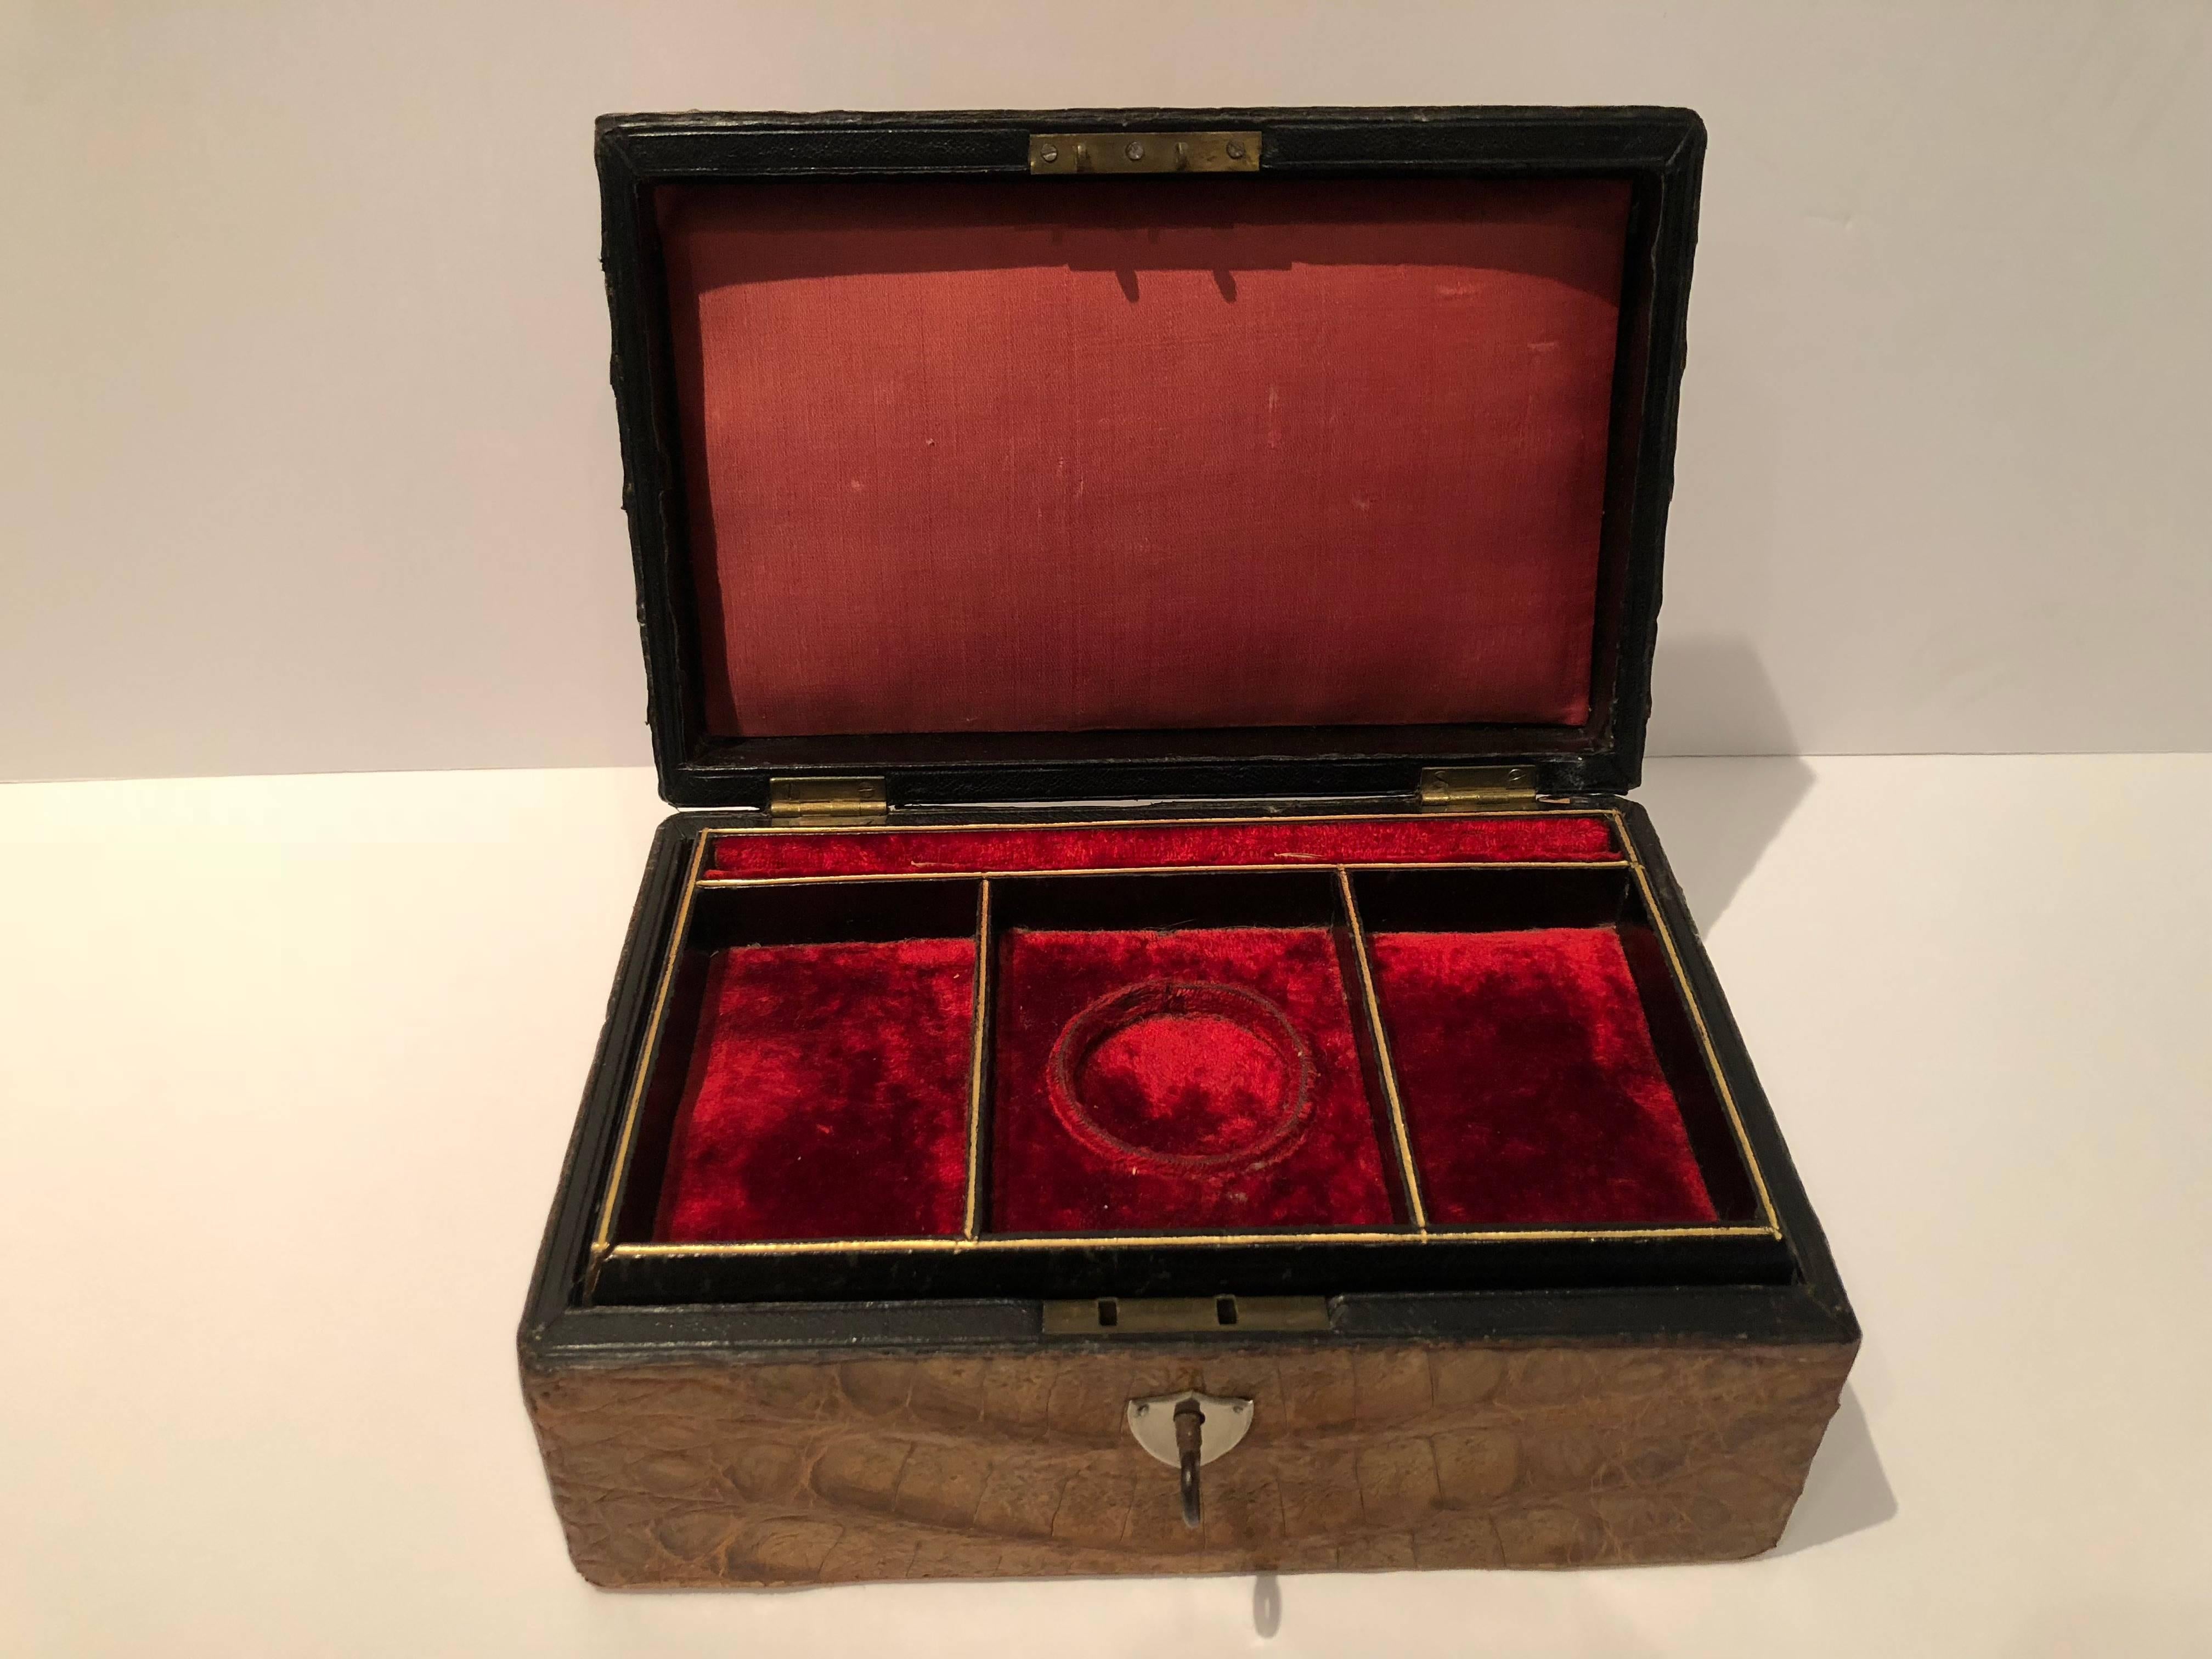 Chic vintage men's crocodile jewelry case in a rich shade of brown having a red satin lining with red velvet removable tray. The tray has sections for cuff links, watches, etc. The exterior hide is in excellent condition.